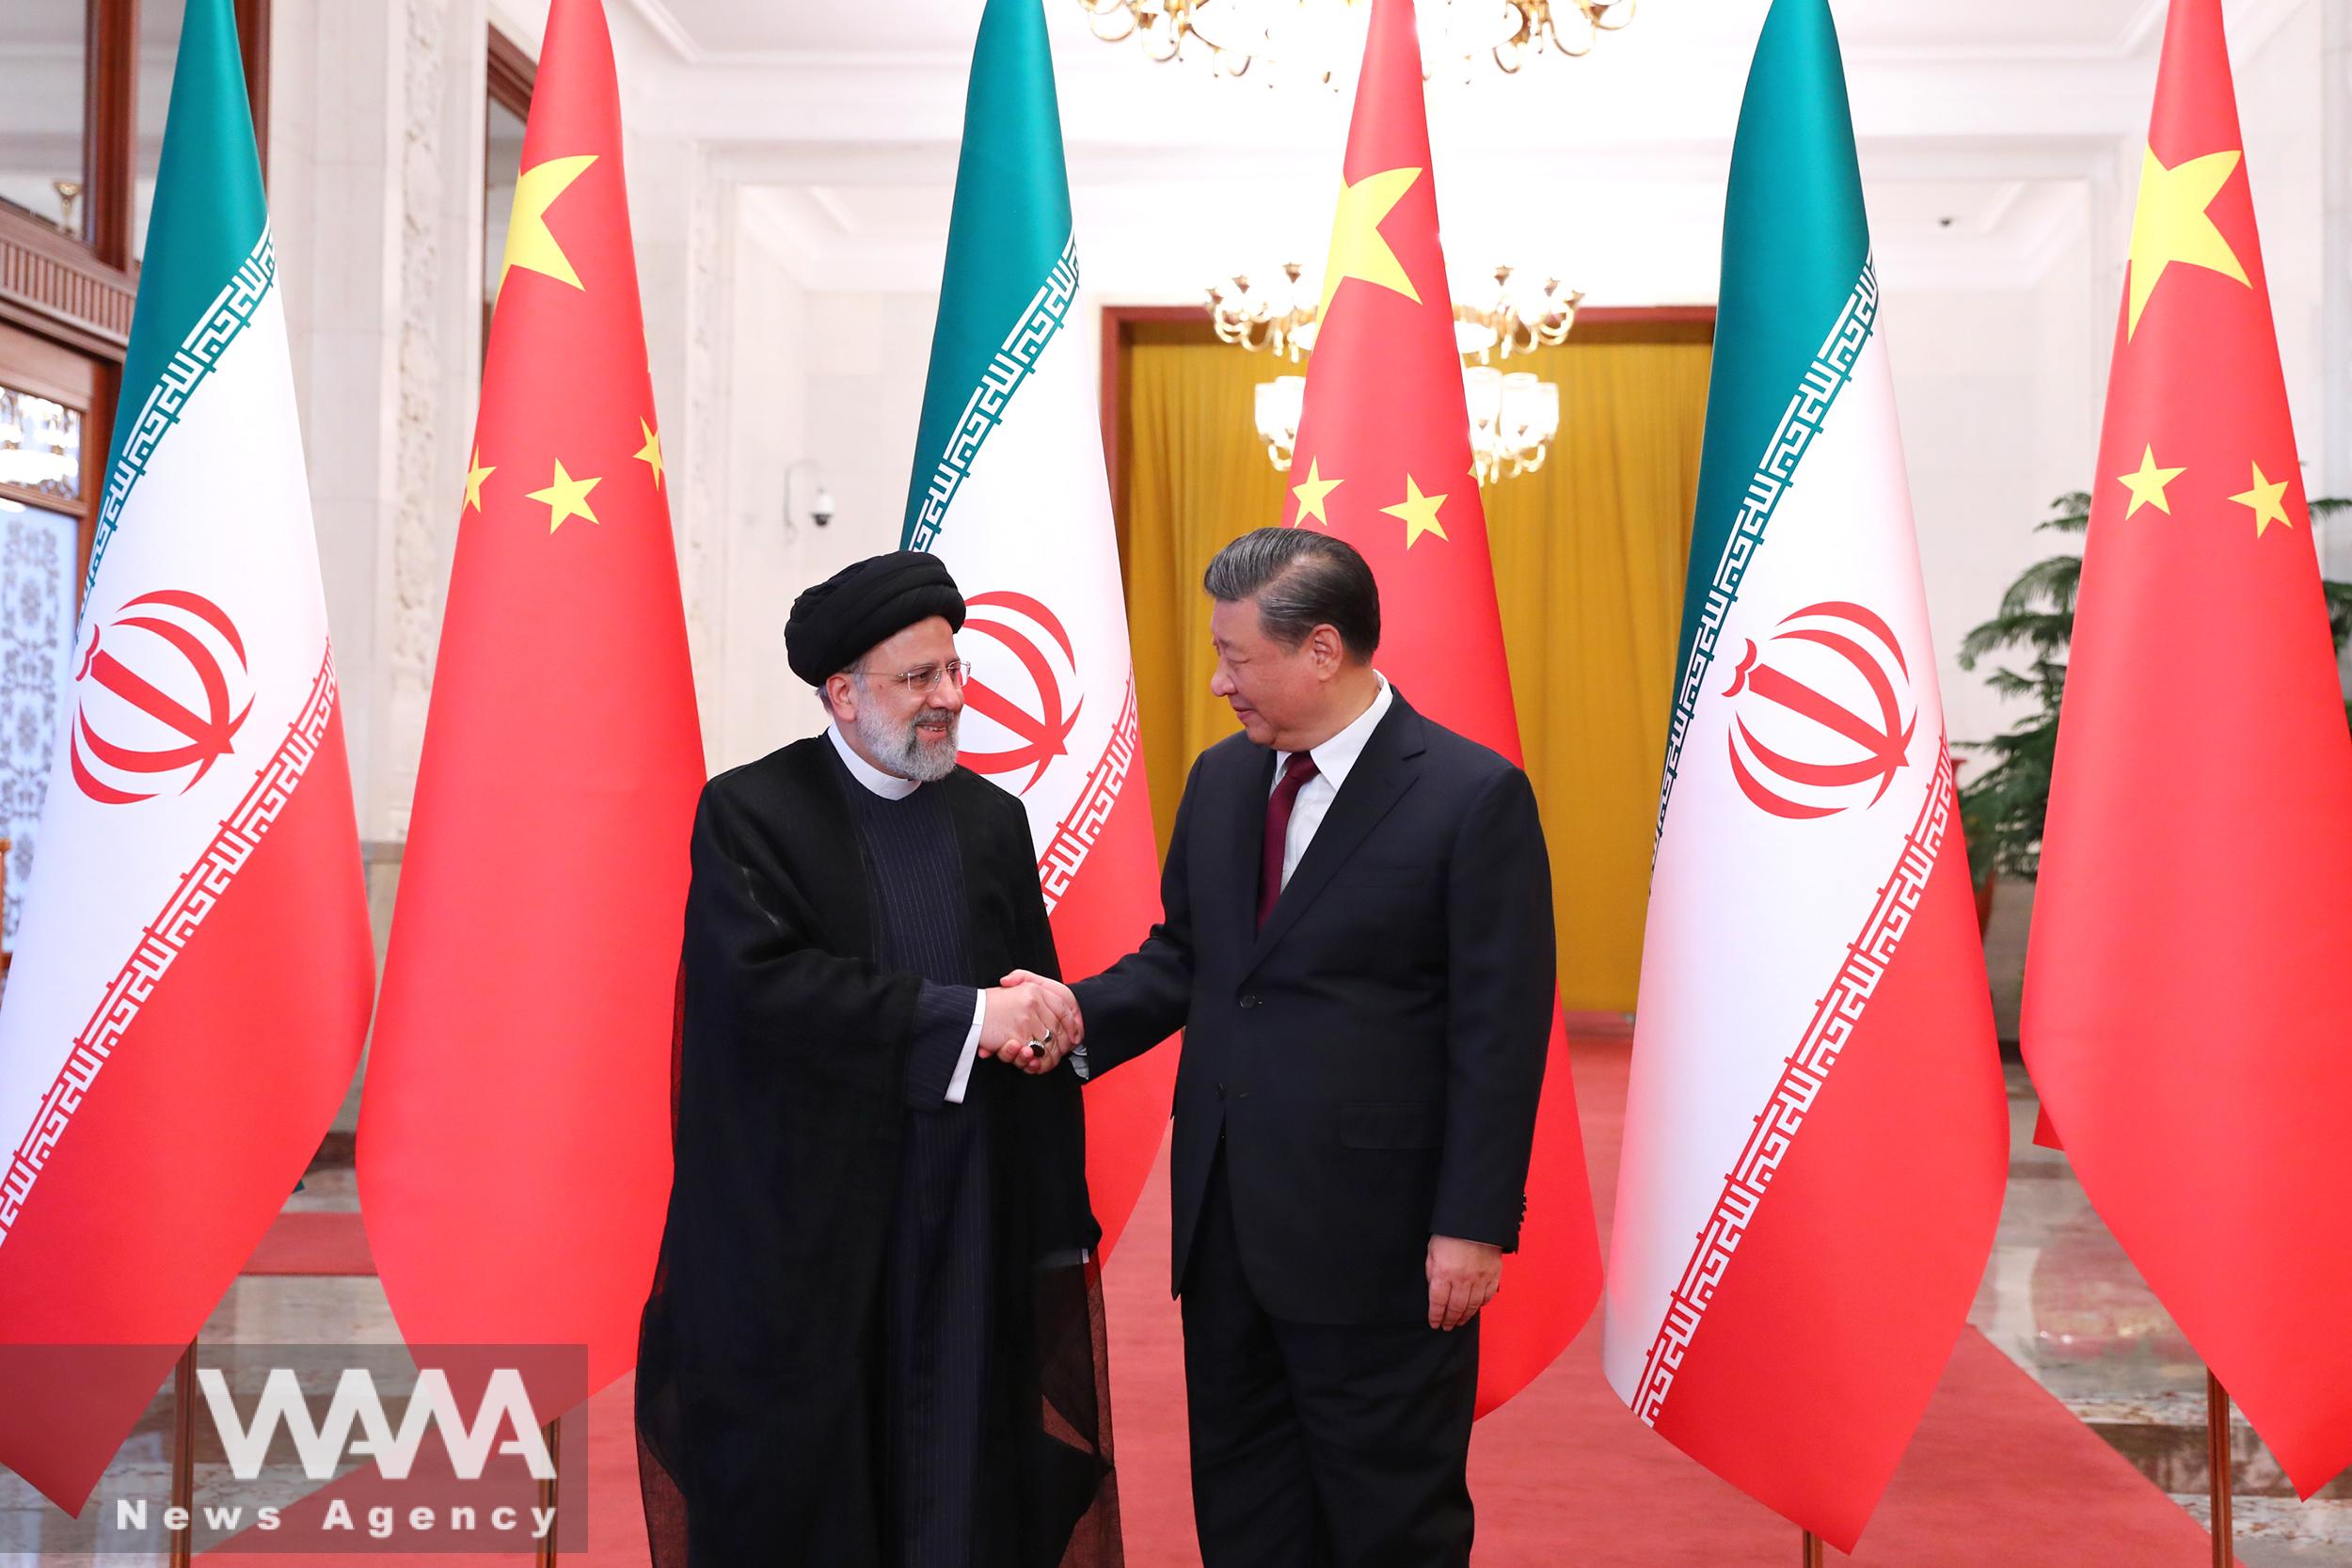 Iranian President Ebrahim Raisi shakes hands with Chinese President Xi Jinping during a welcoming ceremony in Beijing, China, February 14, 2023. Iran's President Website/WANA (West Asia News Agency)